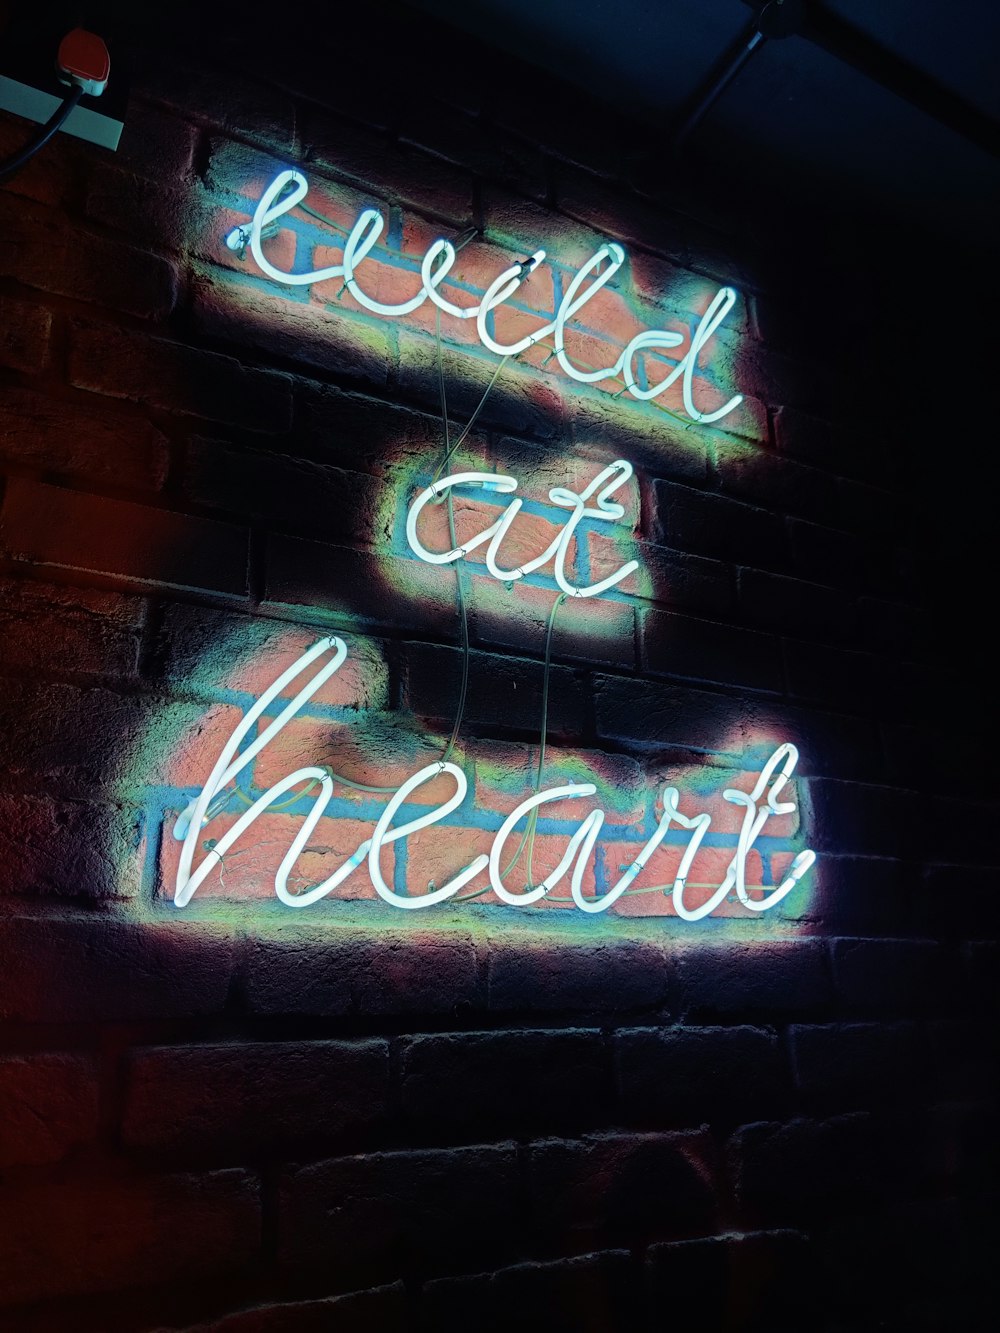 a neon sign on a brick wall that says bleed out heart